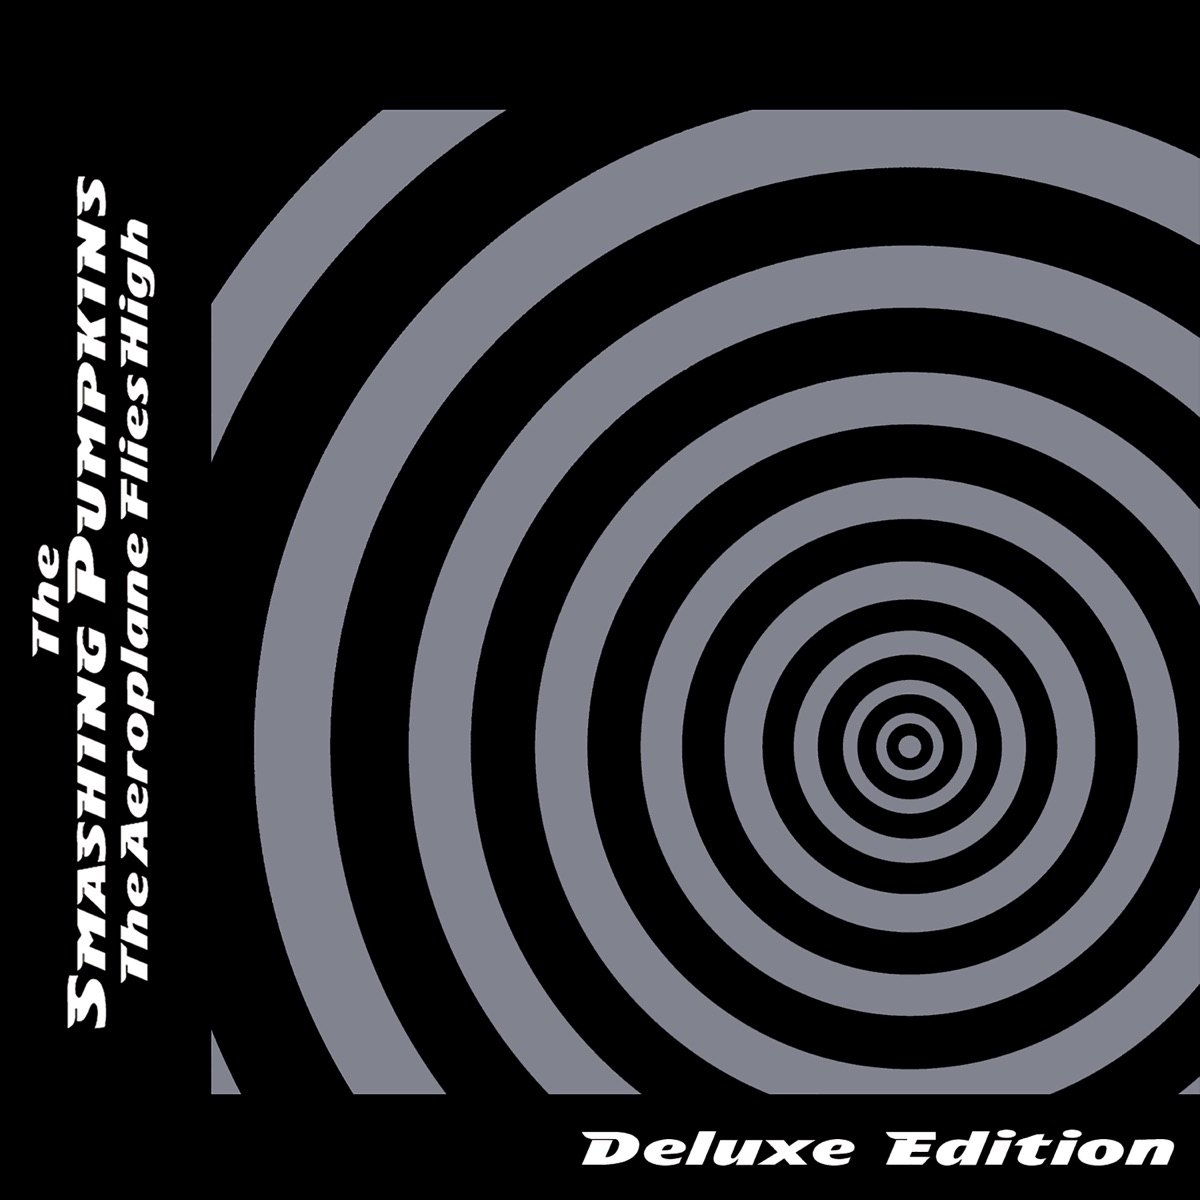 Adore Super Deluxe Edition   Album by The Smashing Pumpkins